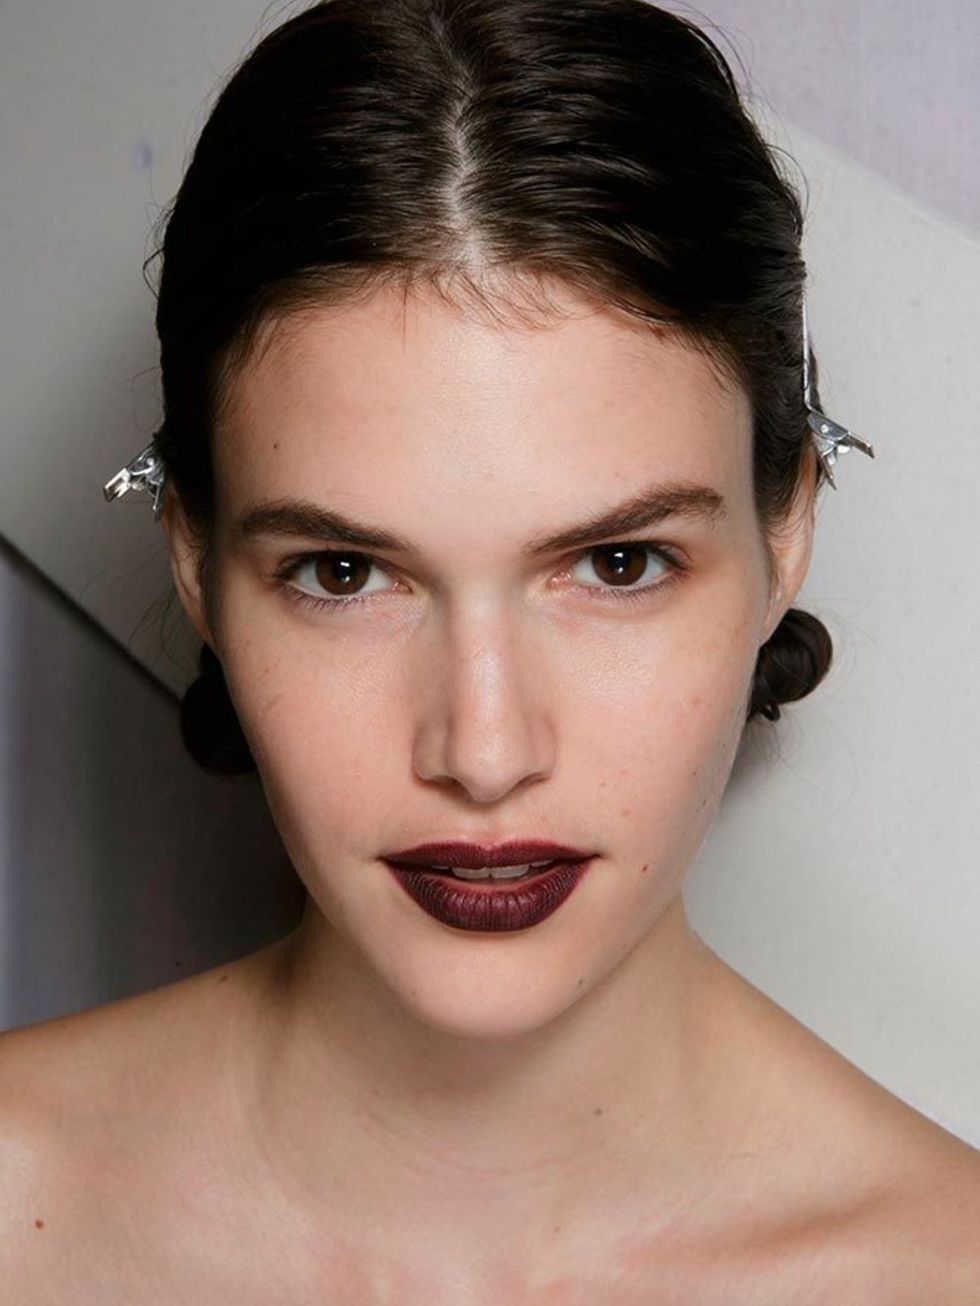 <p>Burberry</p>

<p>The look: Satin skin with natural contouring and a statement lip.</p>

<p>Make-up artist: Wendy Rowe</p>

<p>Key products: Burberry Face Contour pen, Fresh Glow Fluid Foundation, Lip Definer in Oxblood No.14 and Lip Velvet in Oxblood N